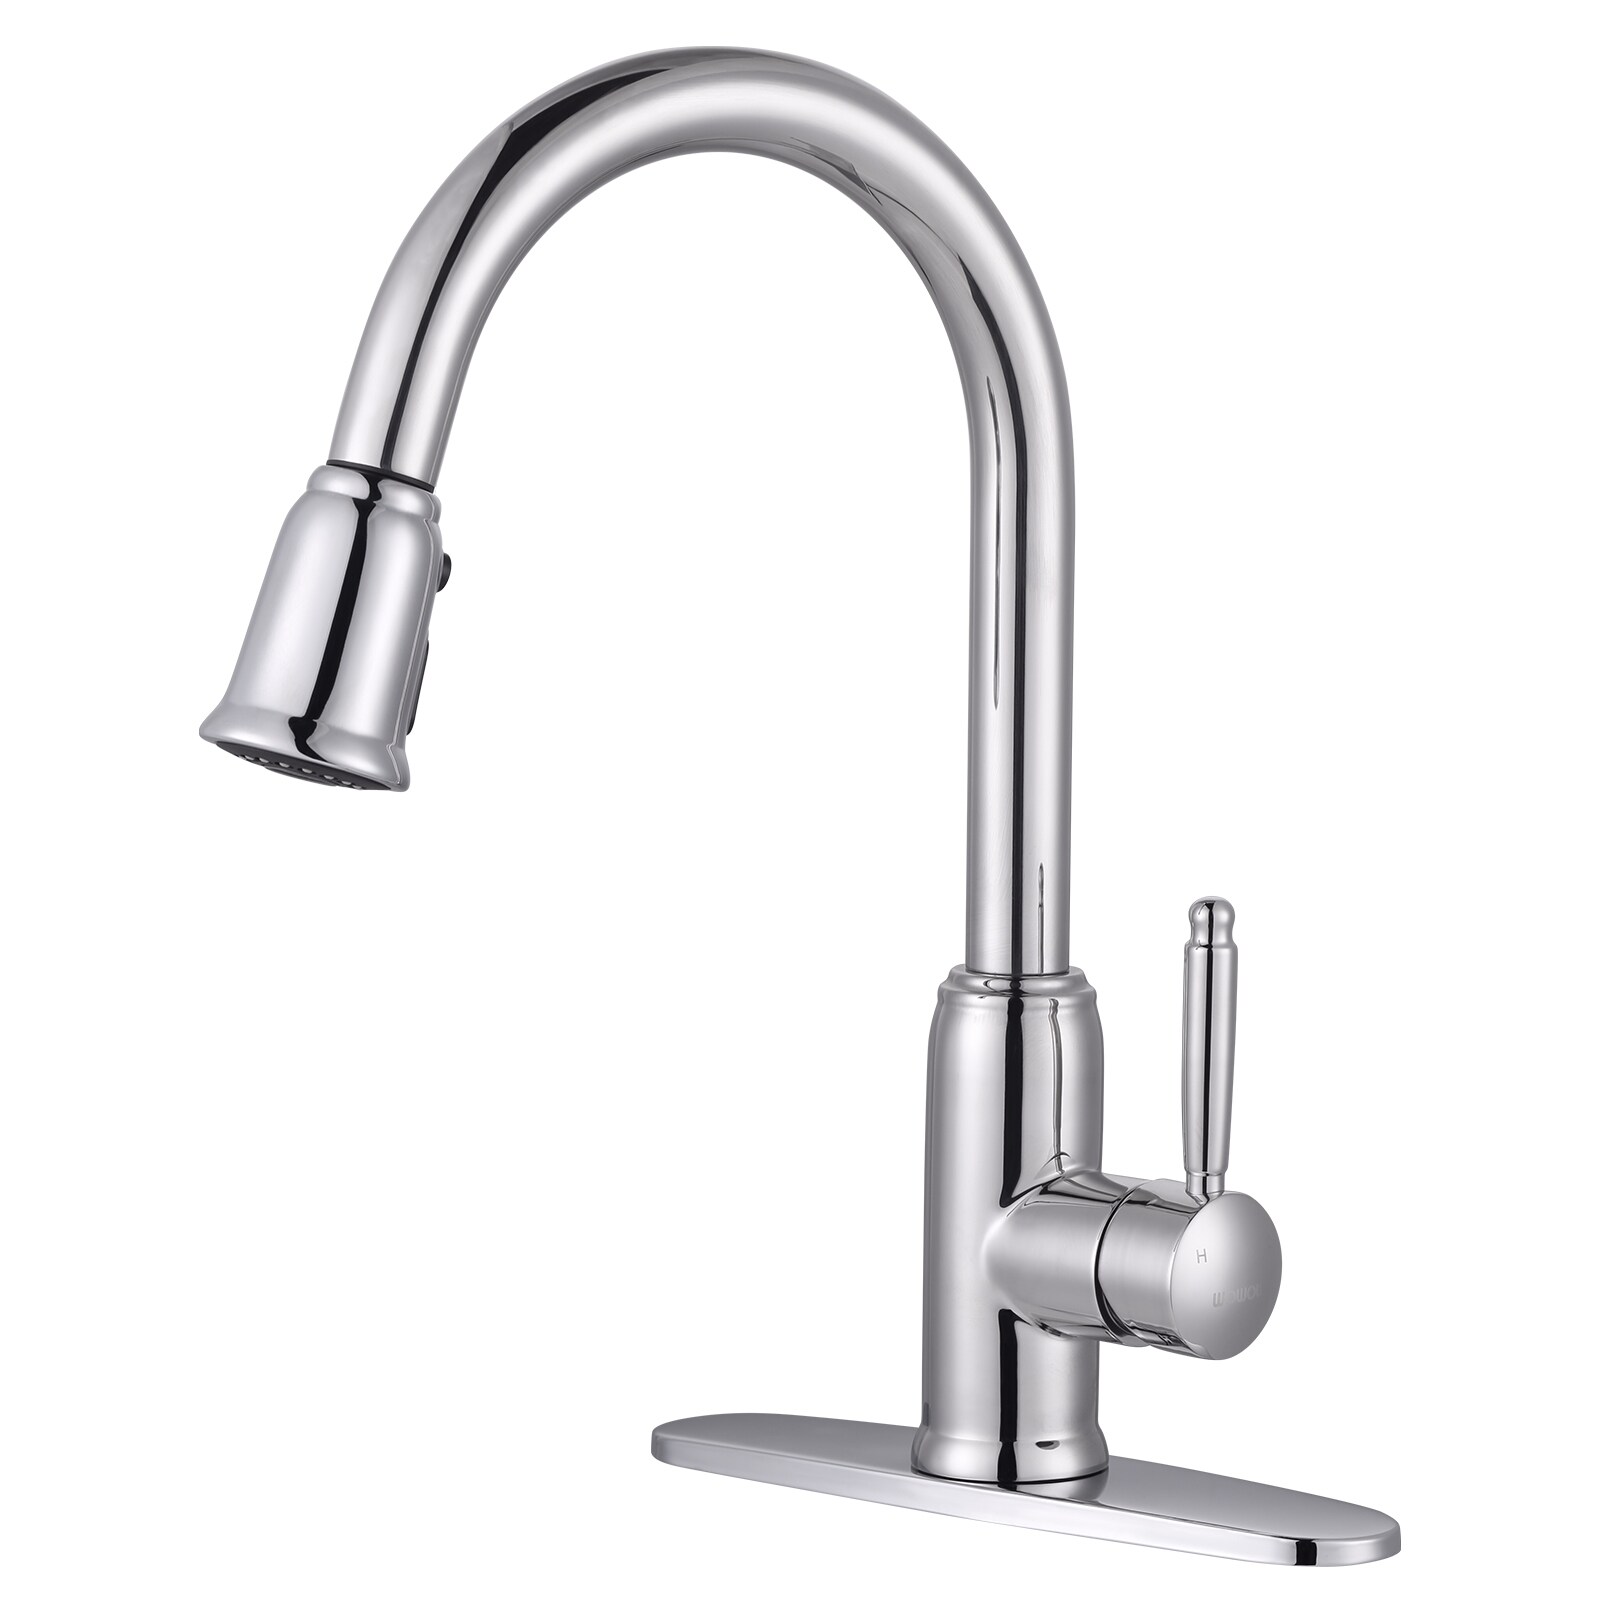 KOHLER Koi Vibrant Brushed Moderne Brass Single Handle Pull-down Kitchen  Faucet with Deck Plate and Soap Dispenser Included